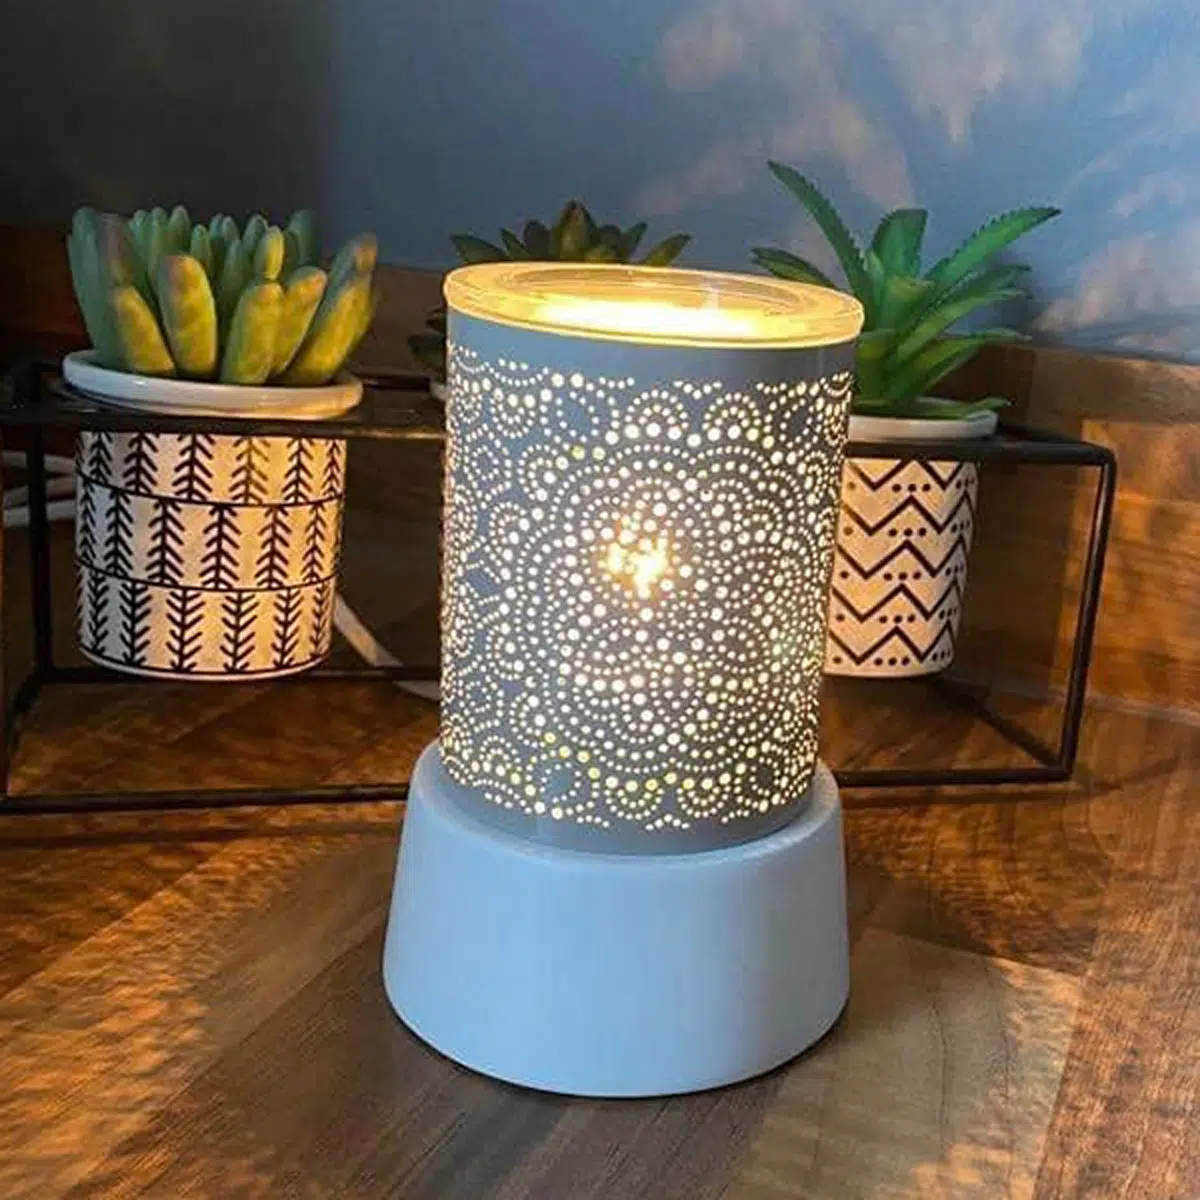 https://www.thecandleboutique.co.uk/wp-content/uploads/2023/03/Aziza-Mini-Scentsy-Warmer-with-Tabletop-Base.png